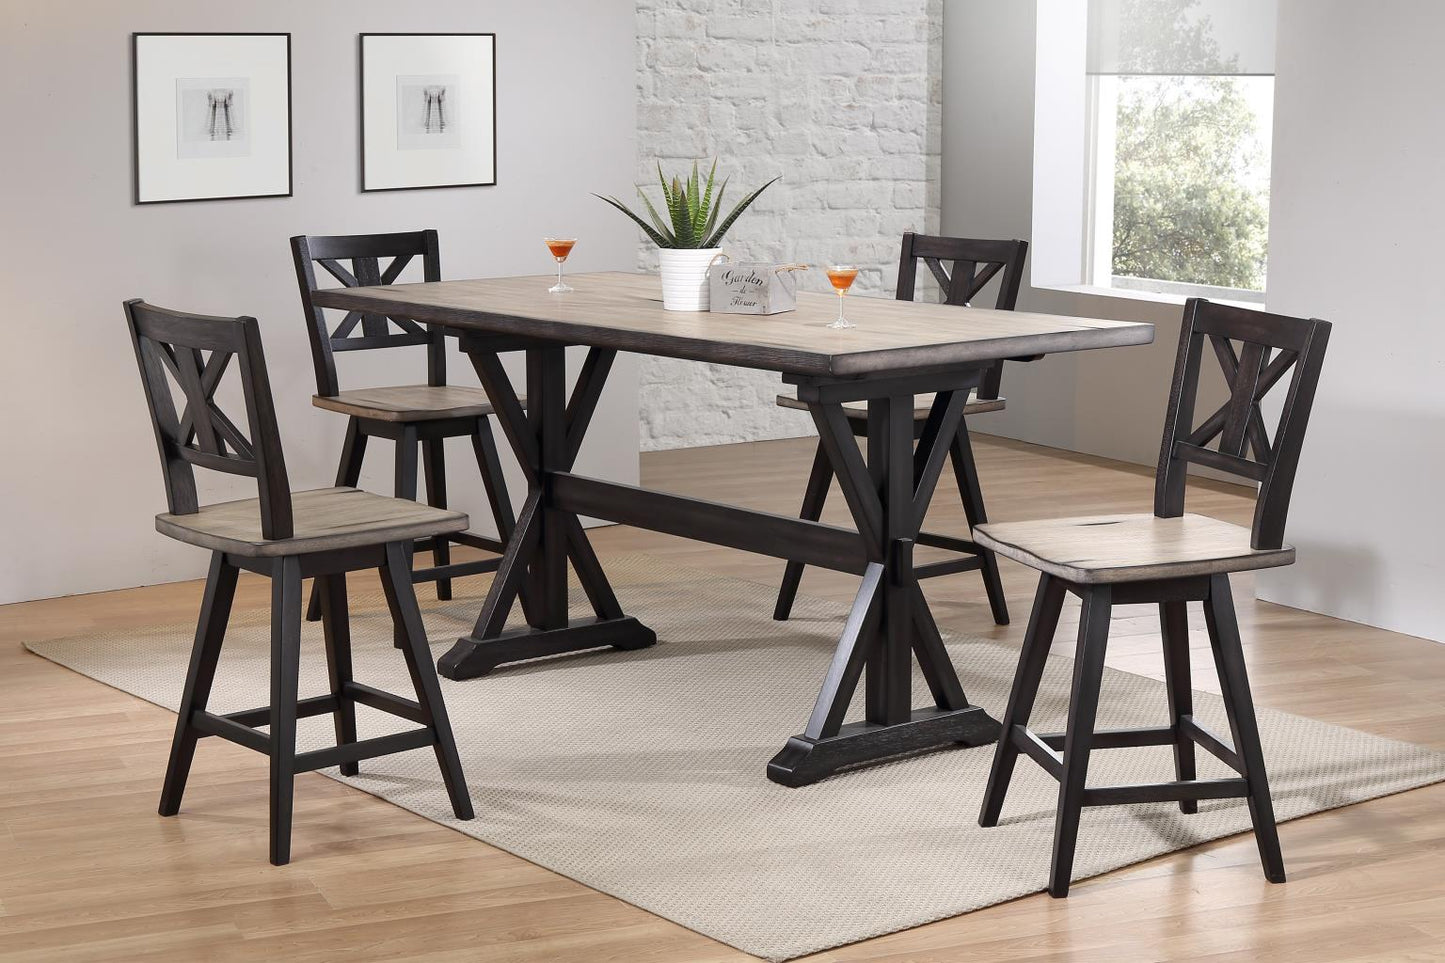 Orlando 2870 Two Tone Dining Collection - Swivel Stools